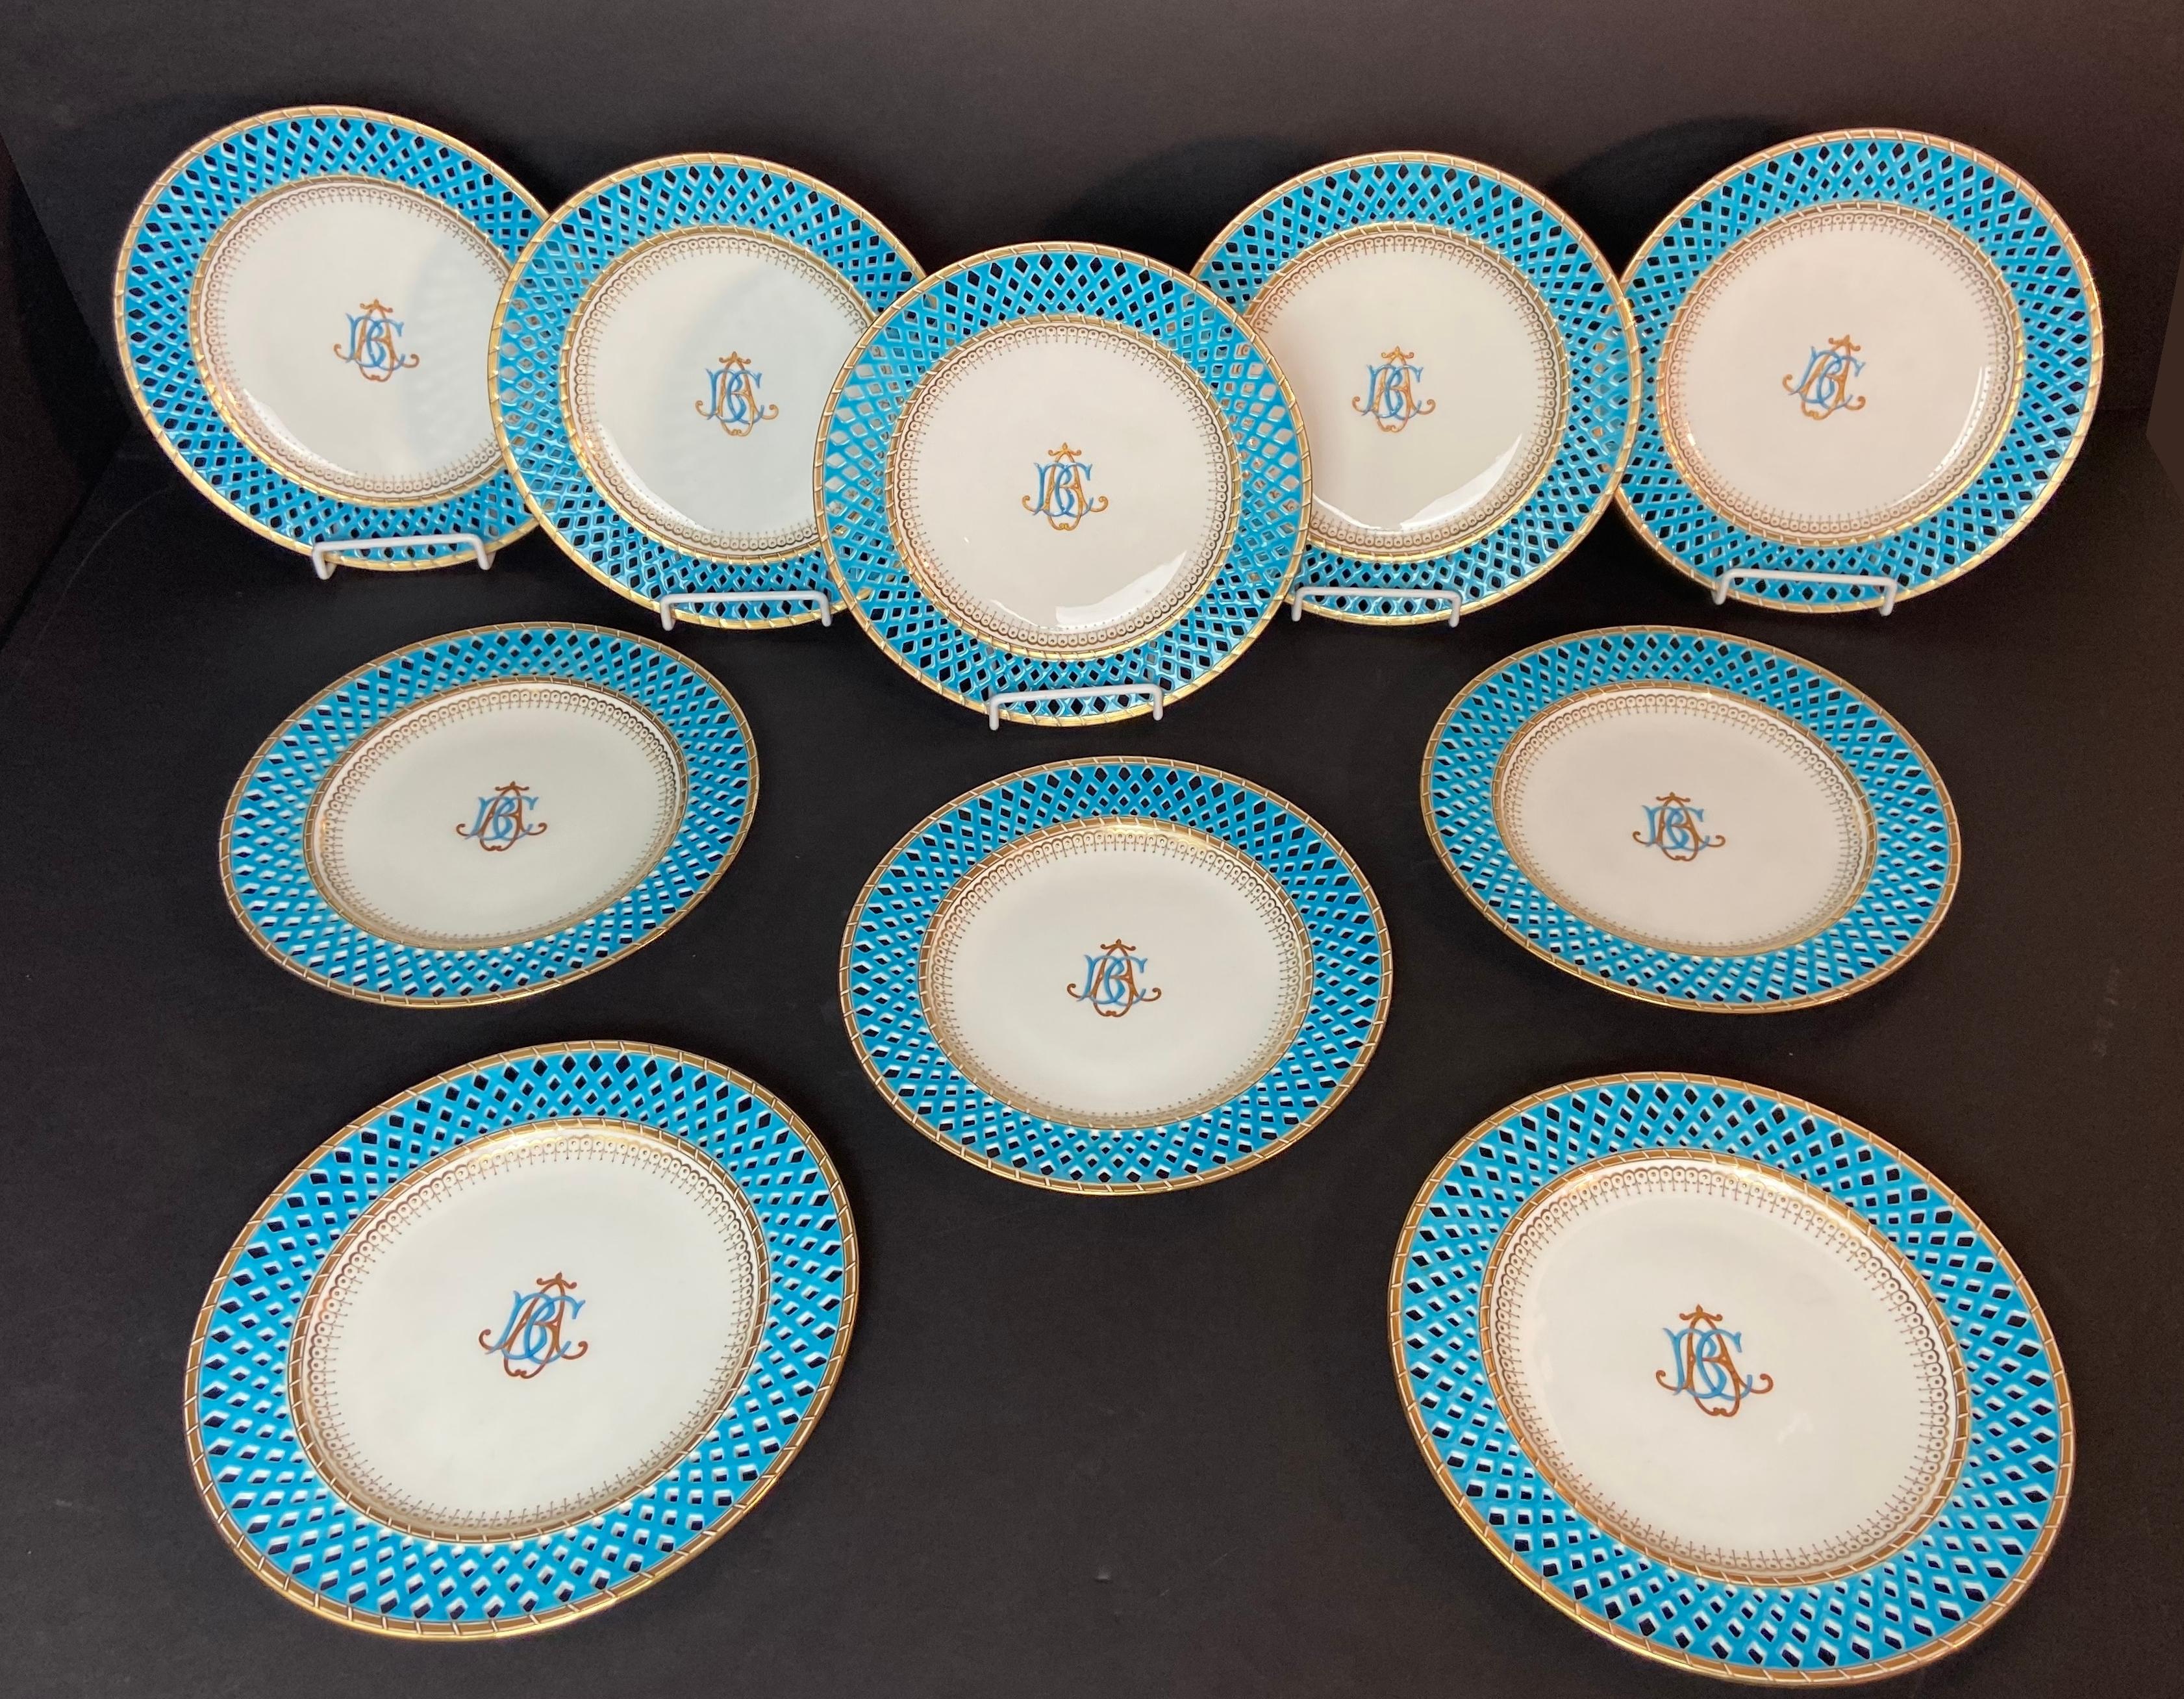 Neoclassical Mintons Presentation Plates for Thomas Goode & Co., Set of 10